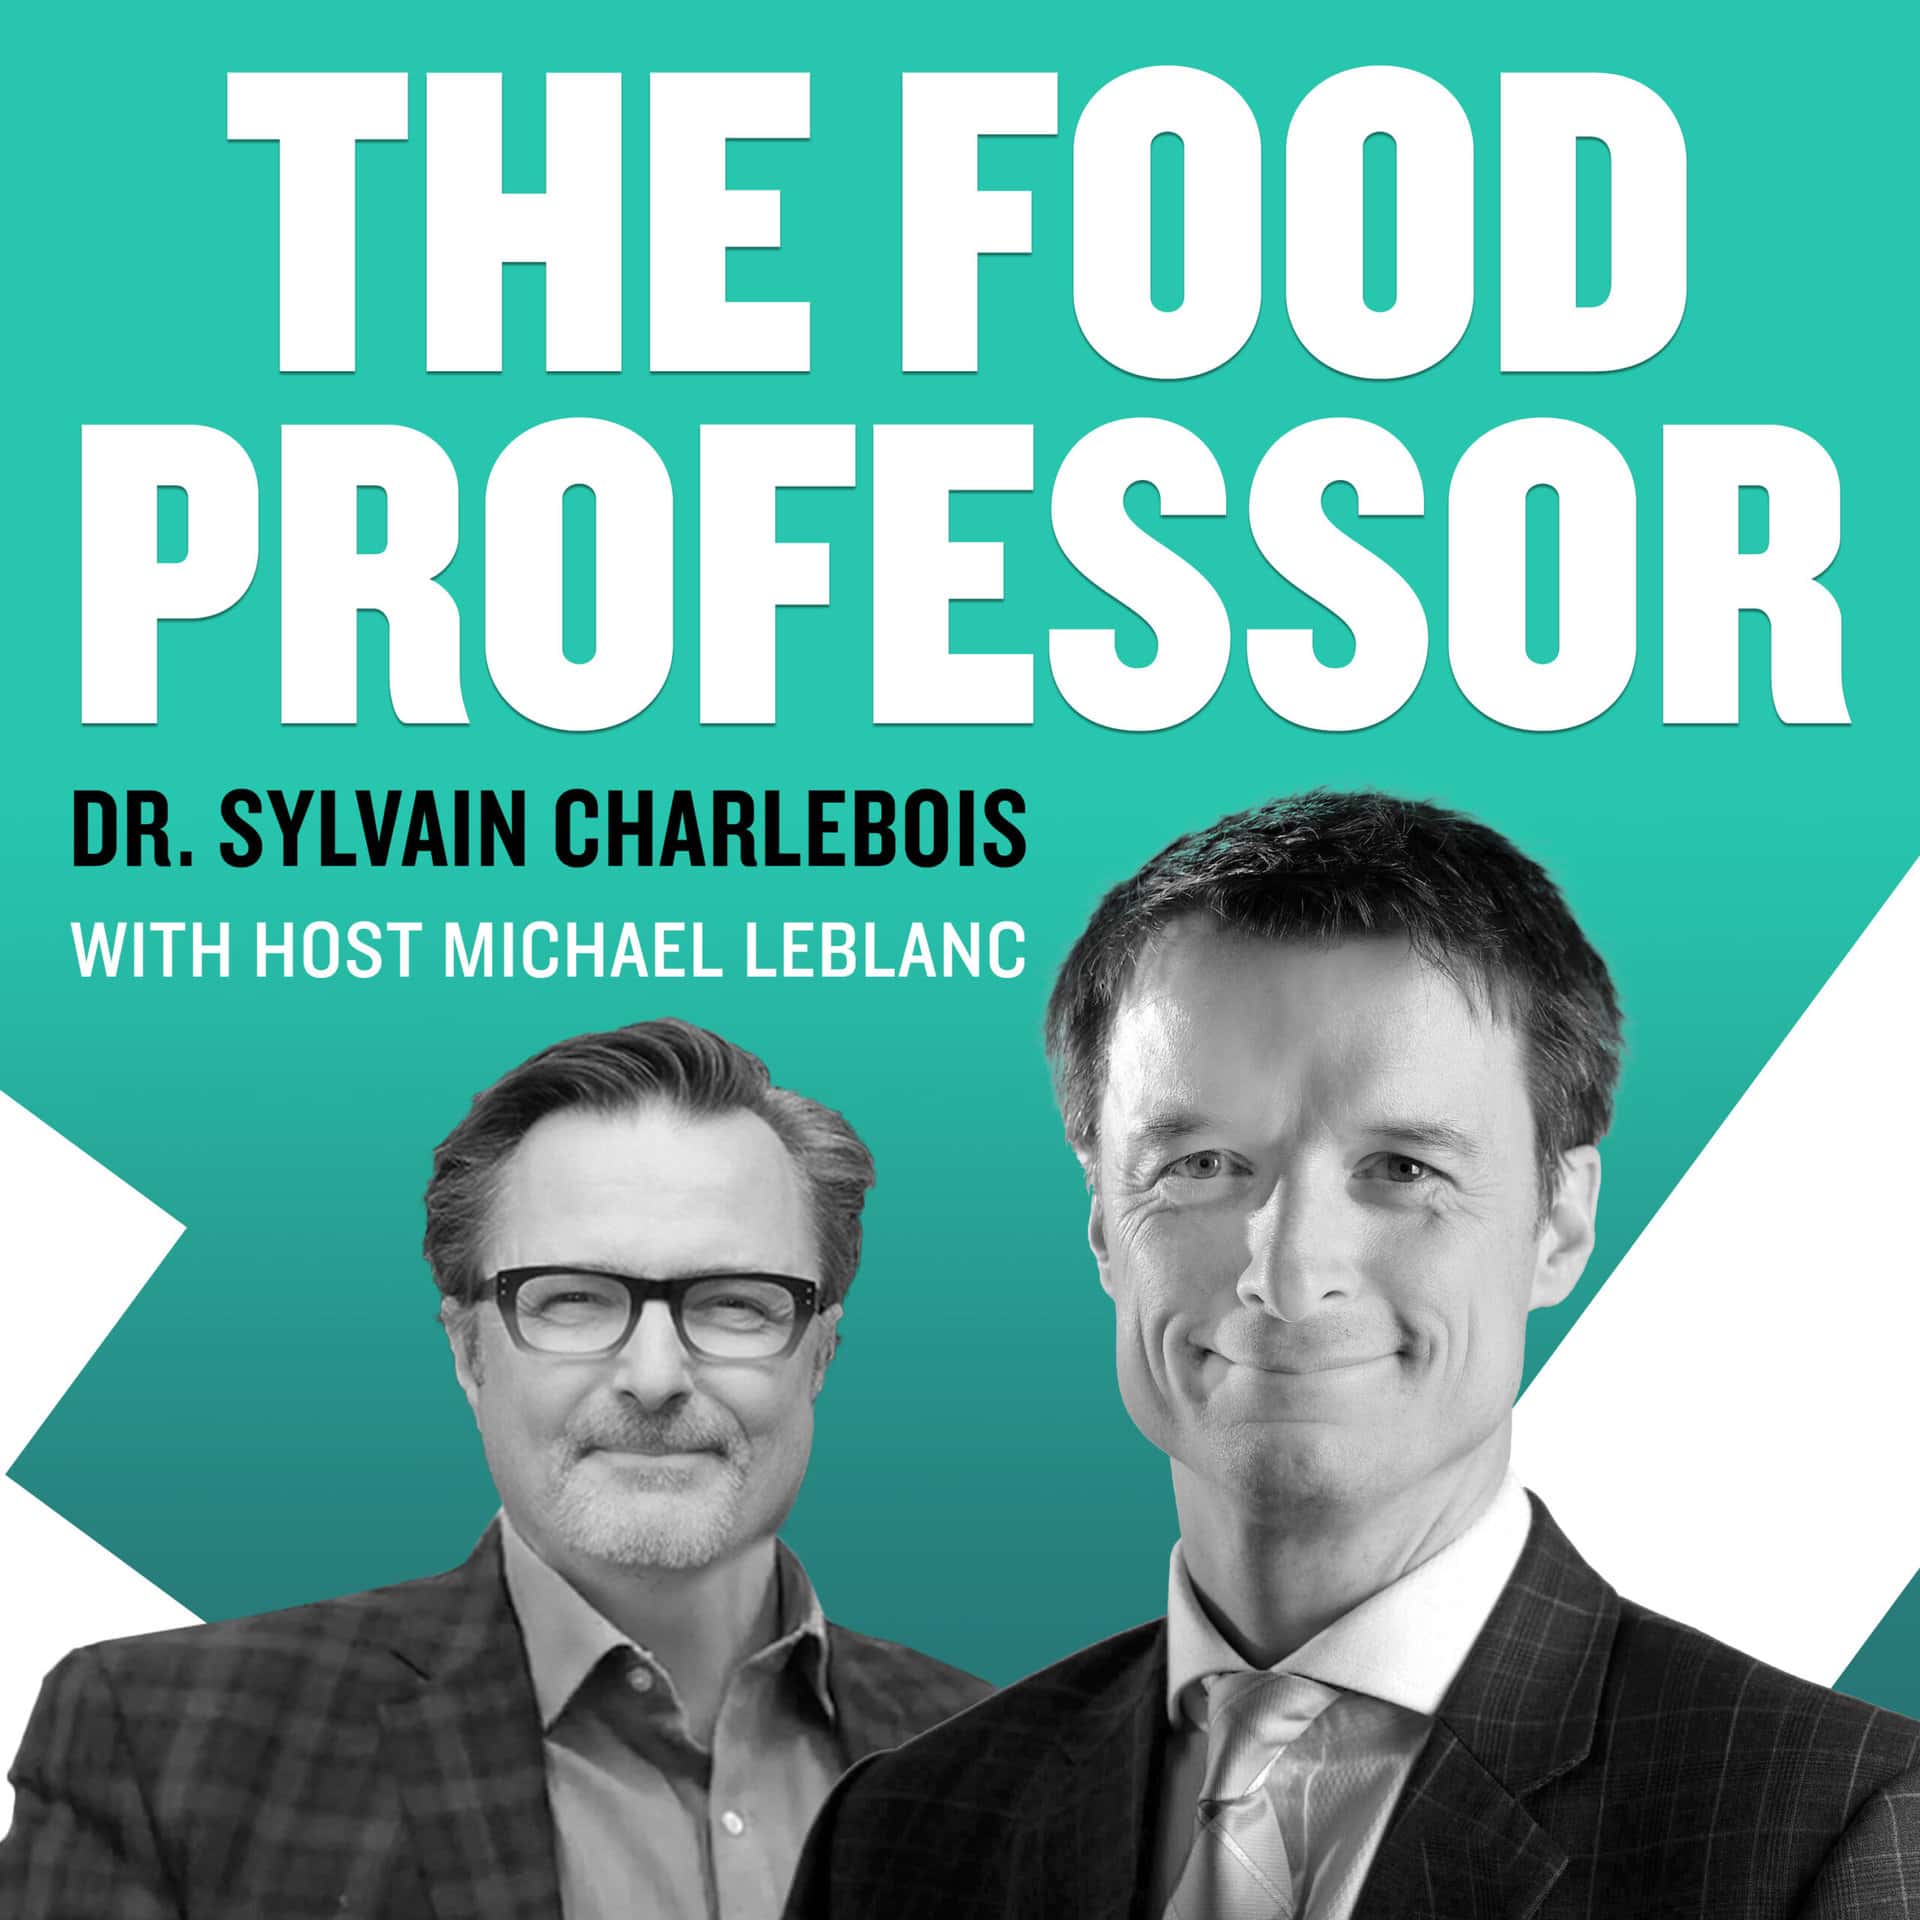 The Food Professor by Dr. Sylvain Charlebois with host Michael LeBlanc